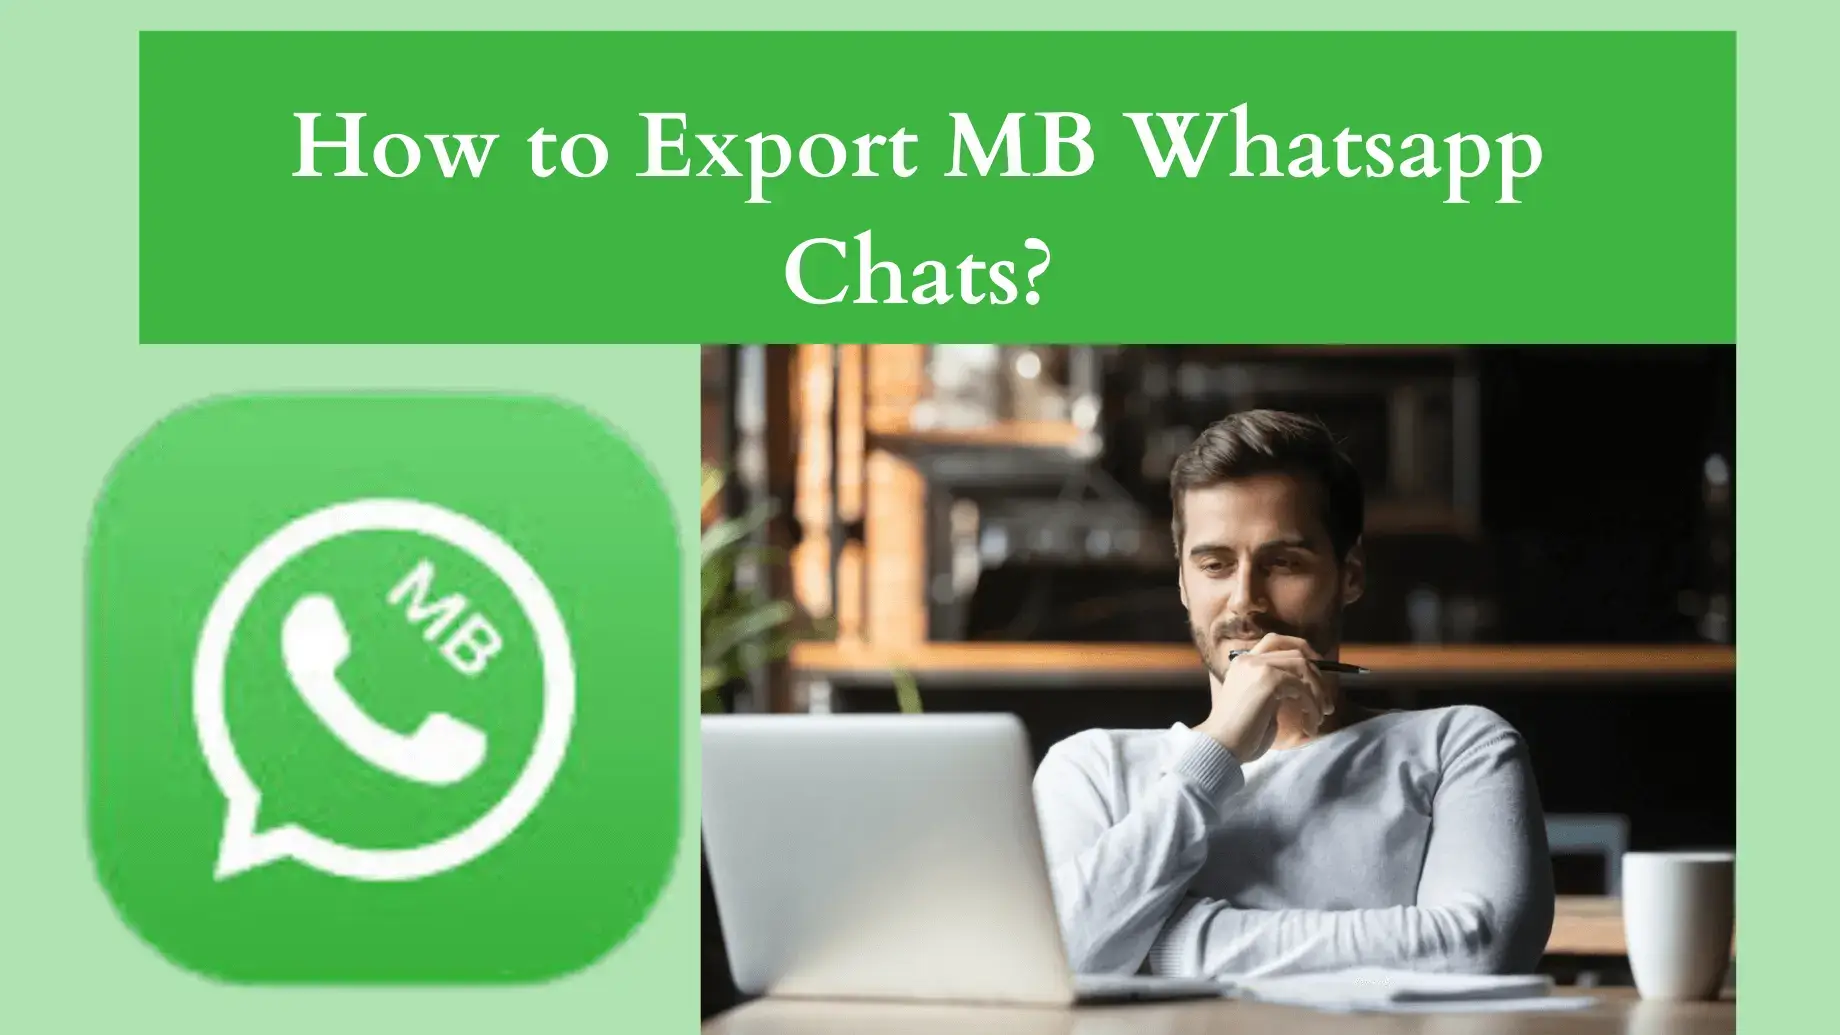 How to Export MB Whatsapp Chats